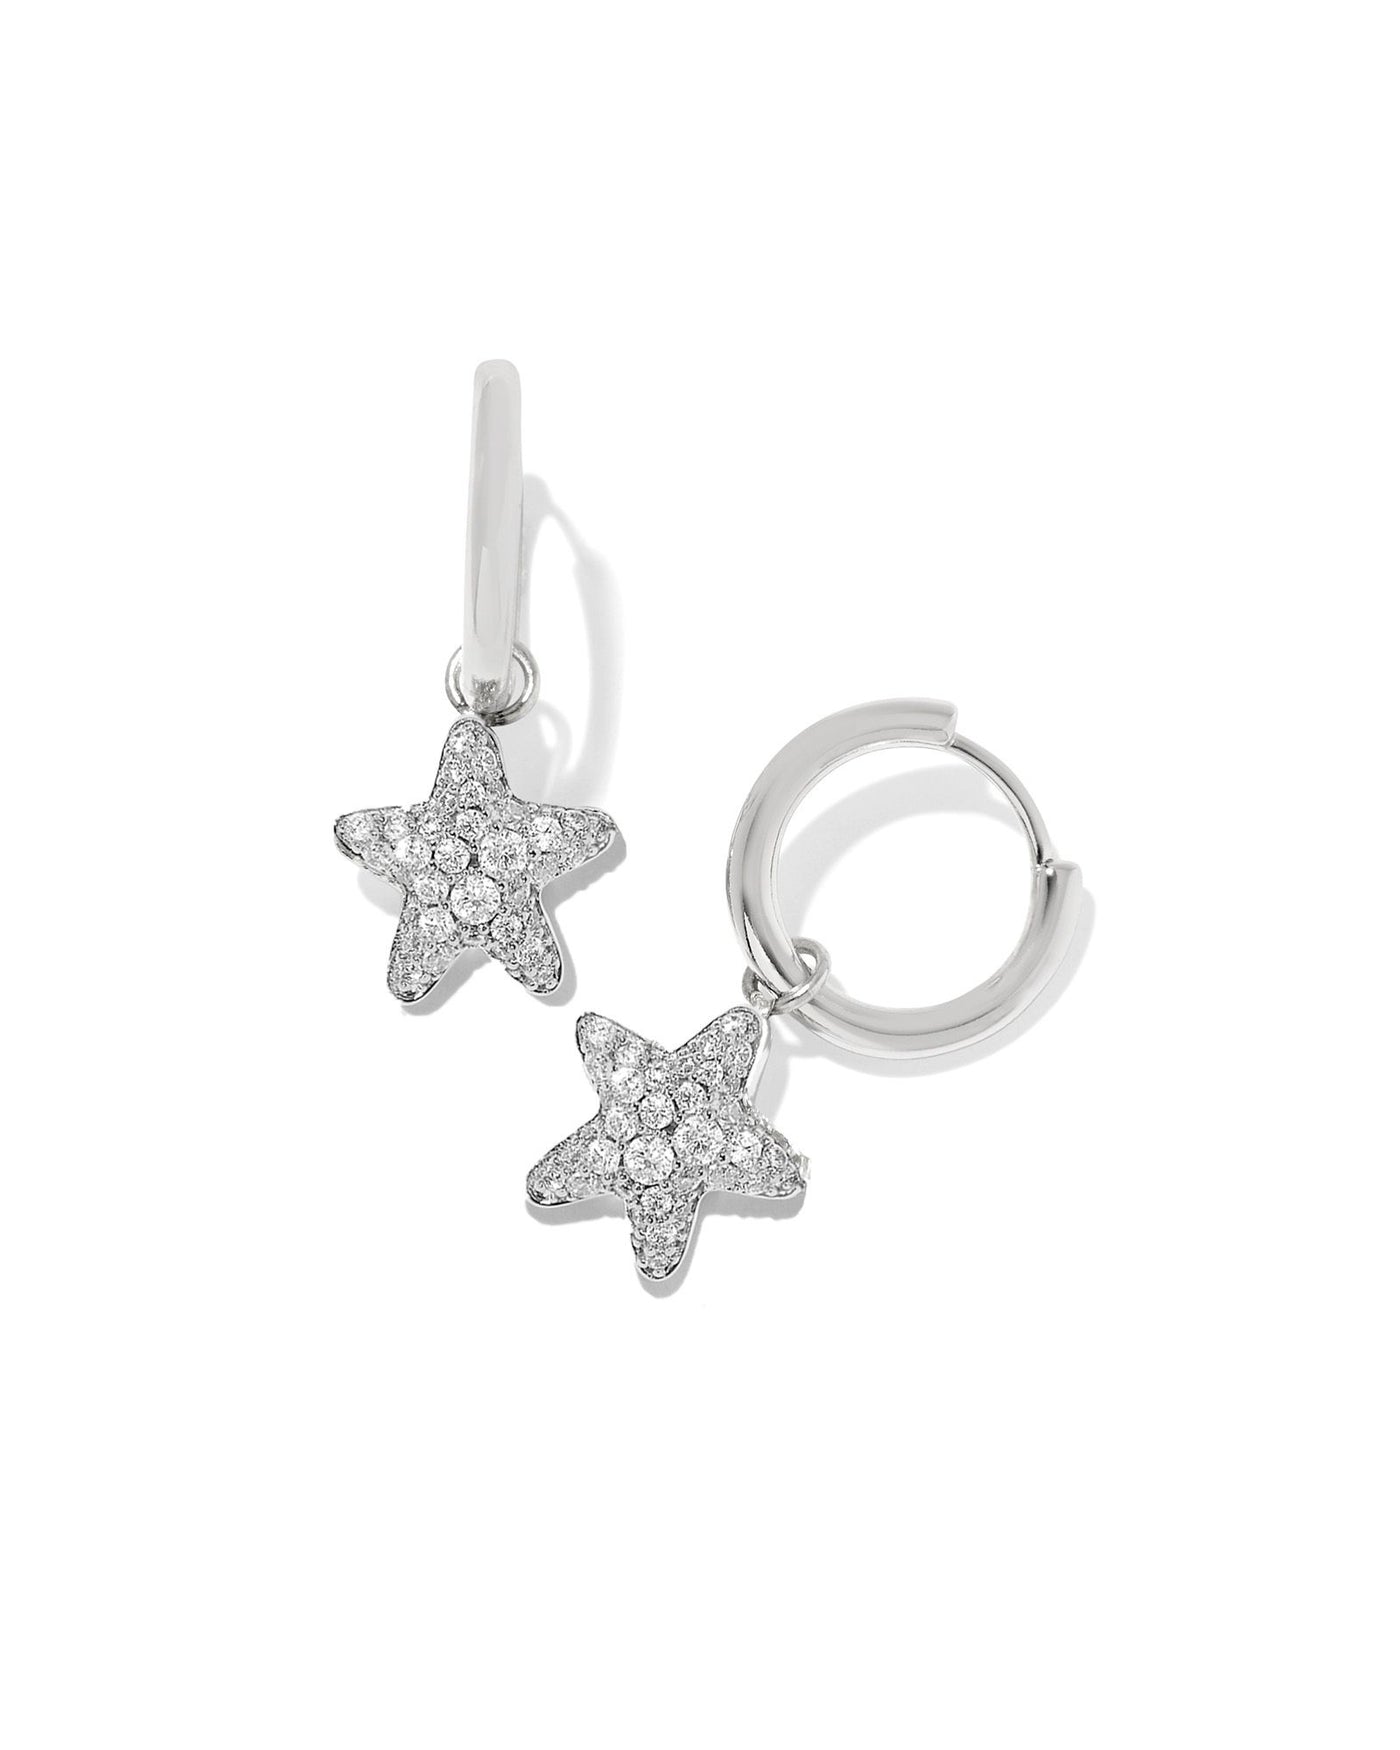 Kendra Scott Jae Star Pave Huggies in Silver White Crystal on white background.